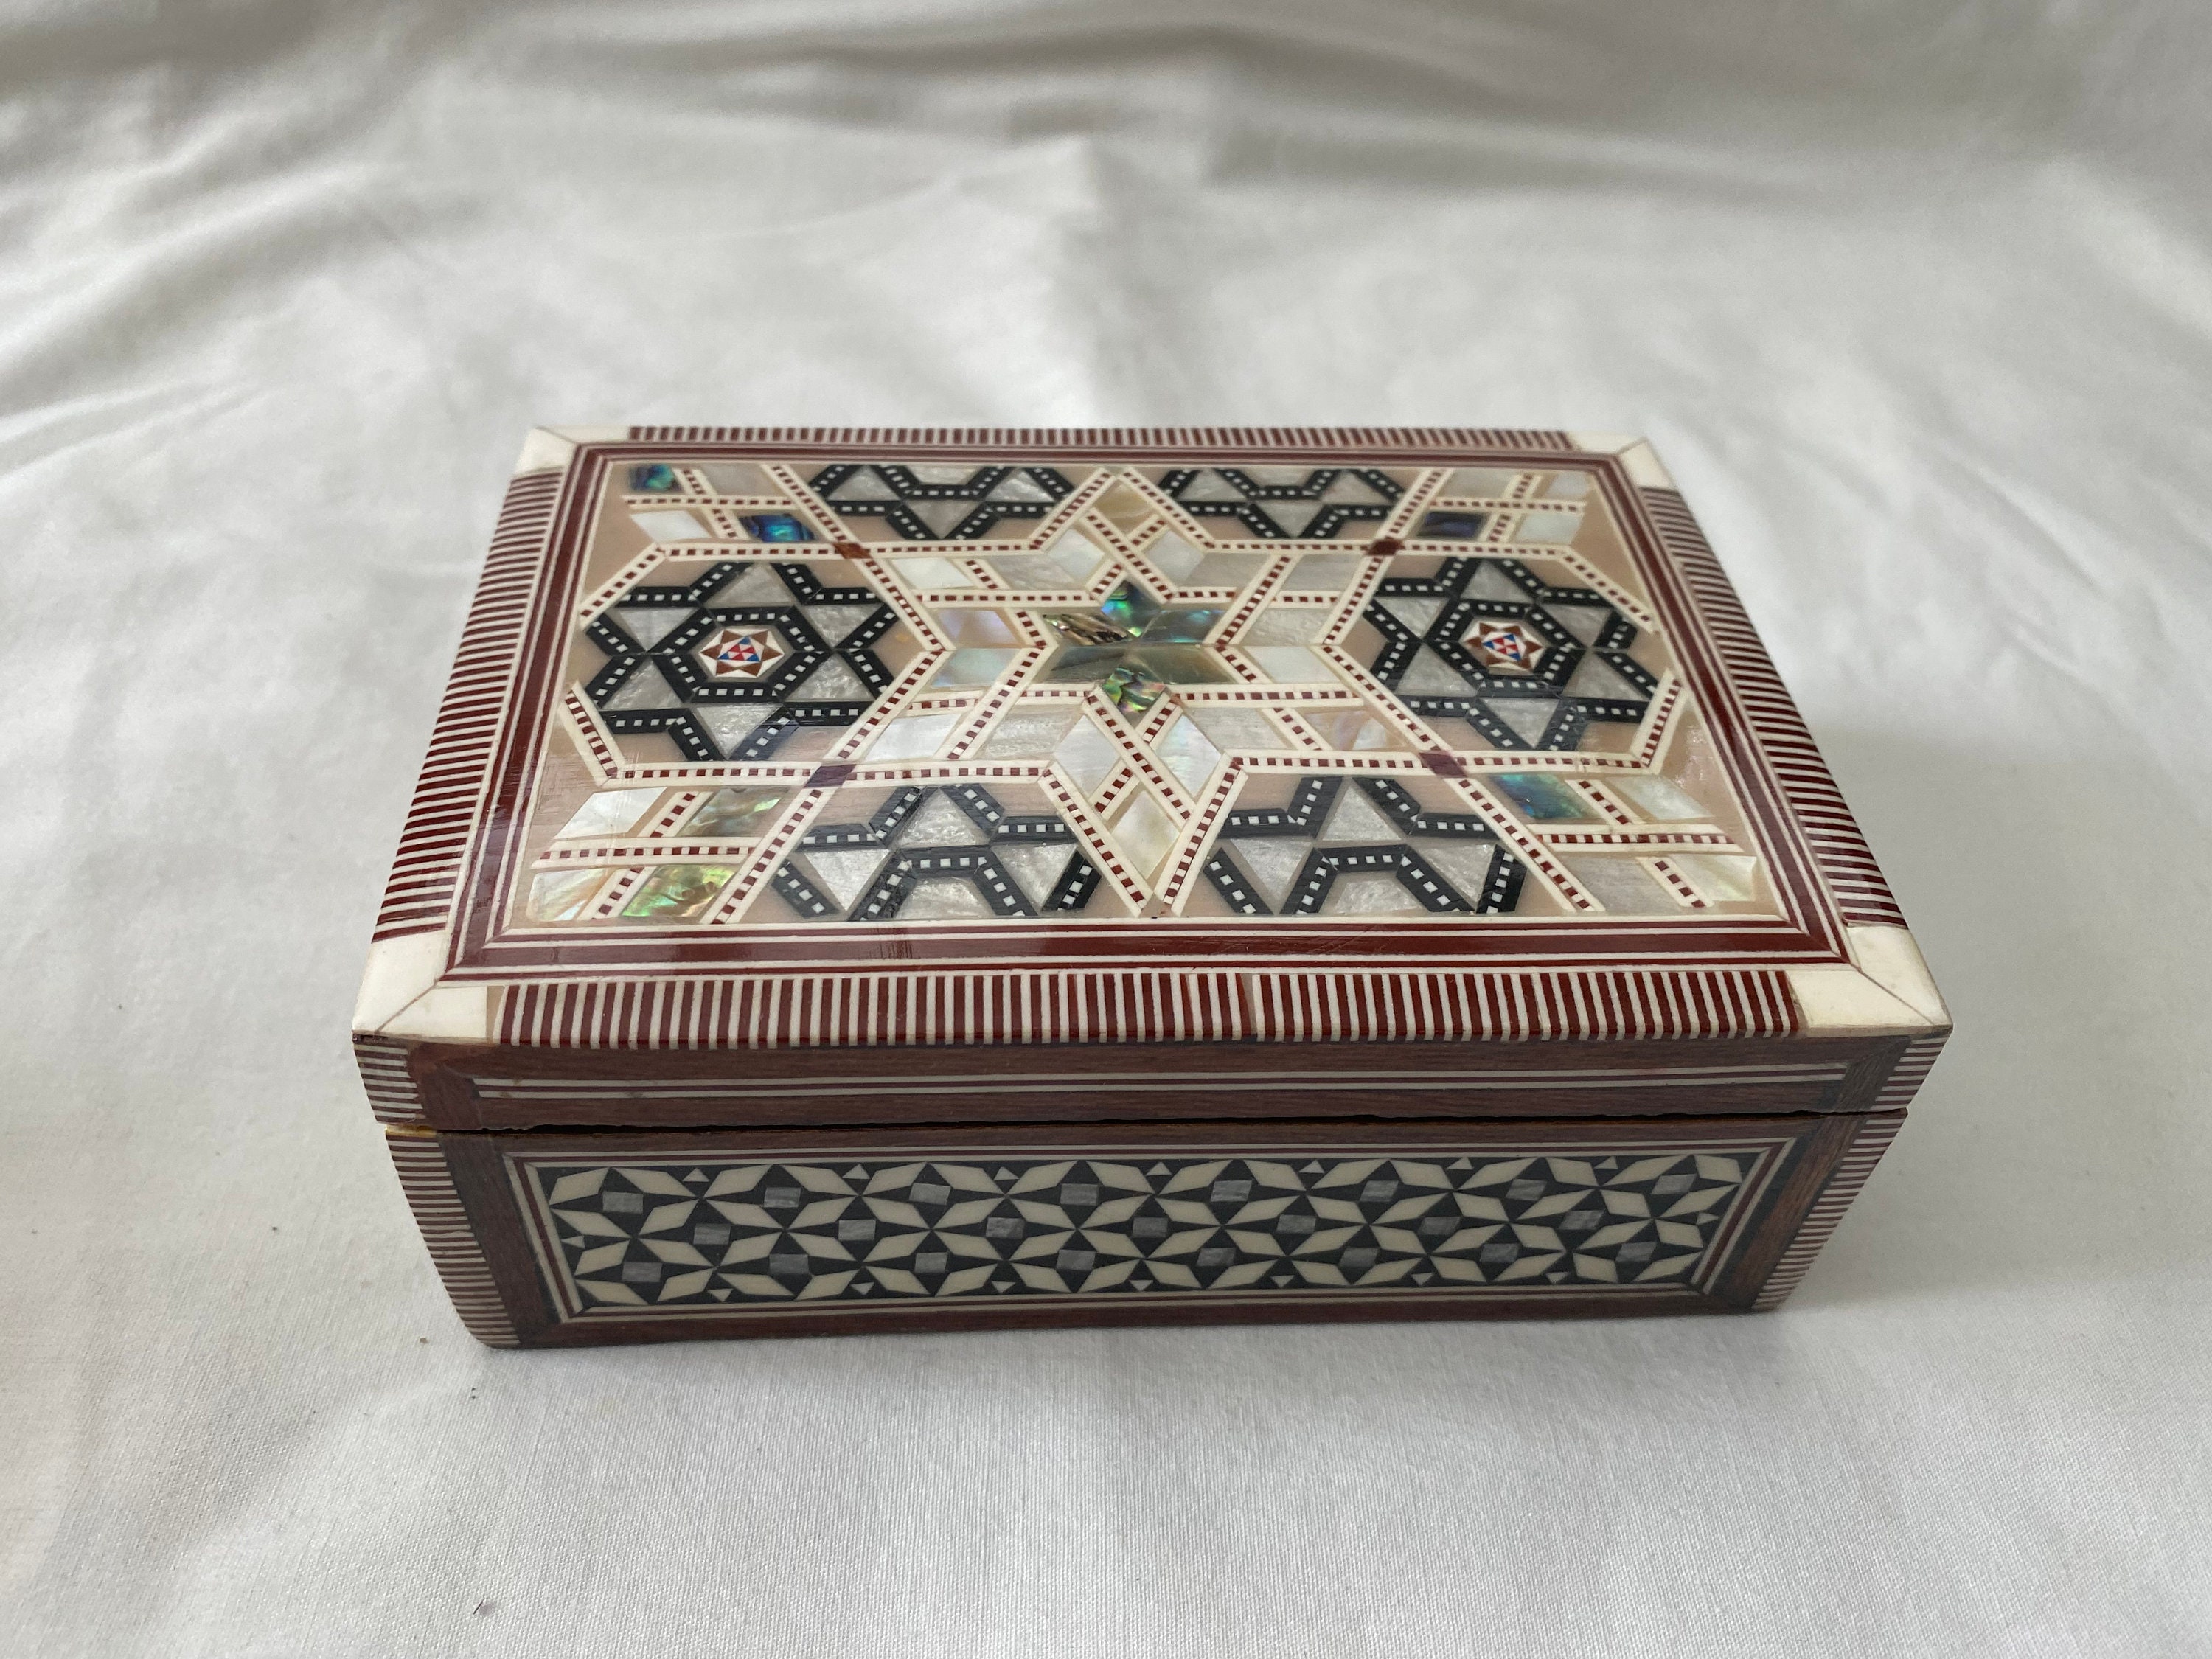 Egyptian Inlaid Mother of Pearl Wooden Handmade Jewelry Box | Etsy